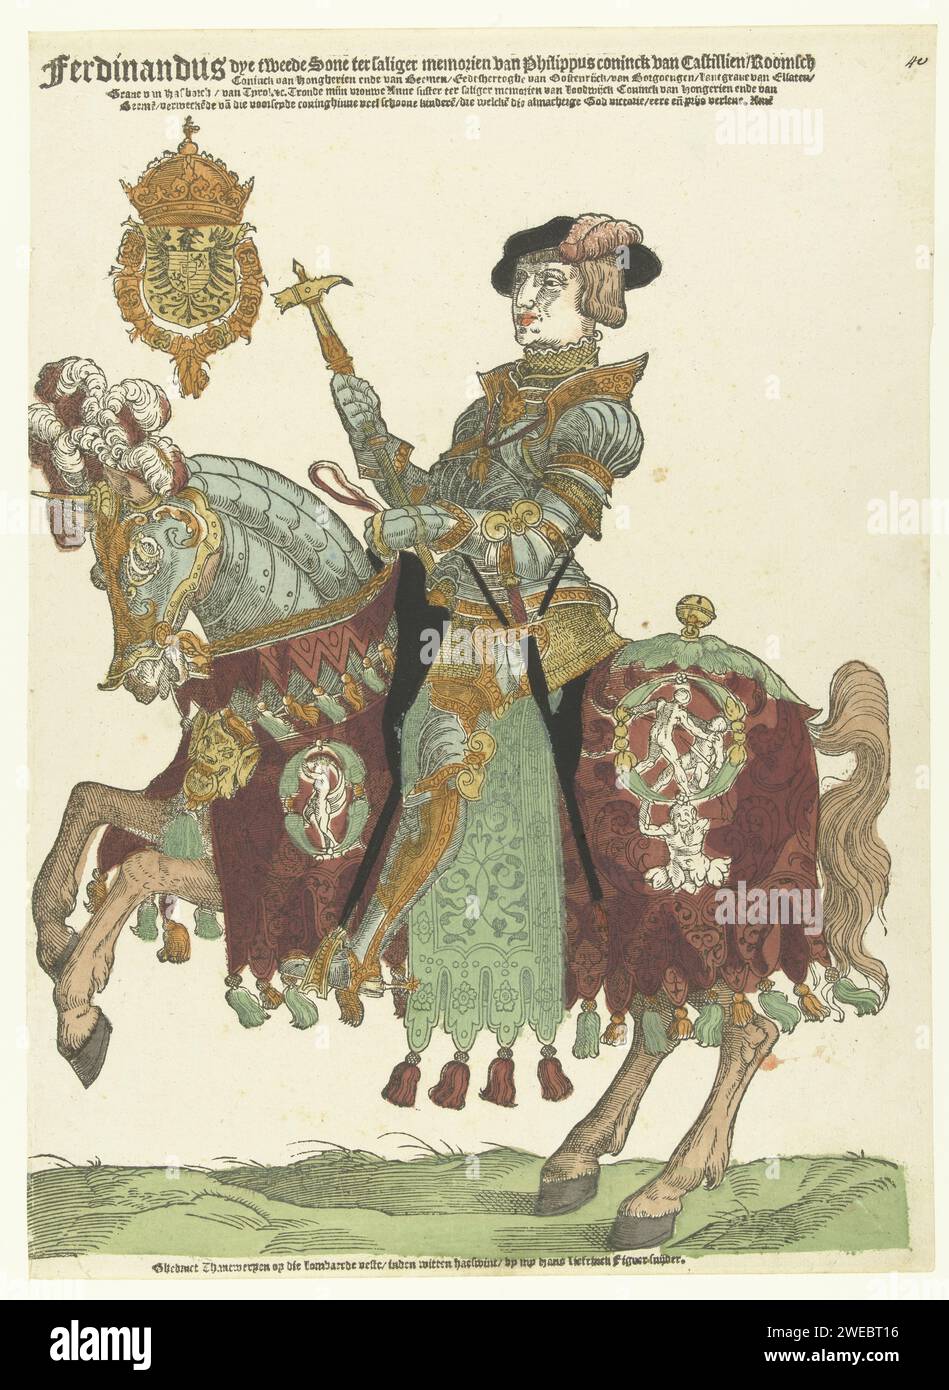 Portrait of Ferdinand I of Austria on horseback, Cornelis Anthonisz. (manner or), c. 1538 - Before 1542 print Ferdinand I of Austria (1503-1564), at the age of about 35. He was the second son of Philip de Schone and some brother of Karel V, chosen as Roman Koning in 1531, and married since 1521 to Anna van Austria (1503-1547). Displayed in Maliënkolder on galloping horse. He is standing upright in the stirrups, as the knights were depicted in the time of Dürer. At the top left the coat of arms of the Roman Squeeze with the Order of the Golden Fleece. Low Countriespublisher: Antwerp paper  hist Stock Photo